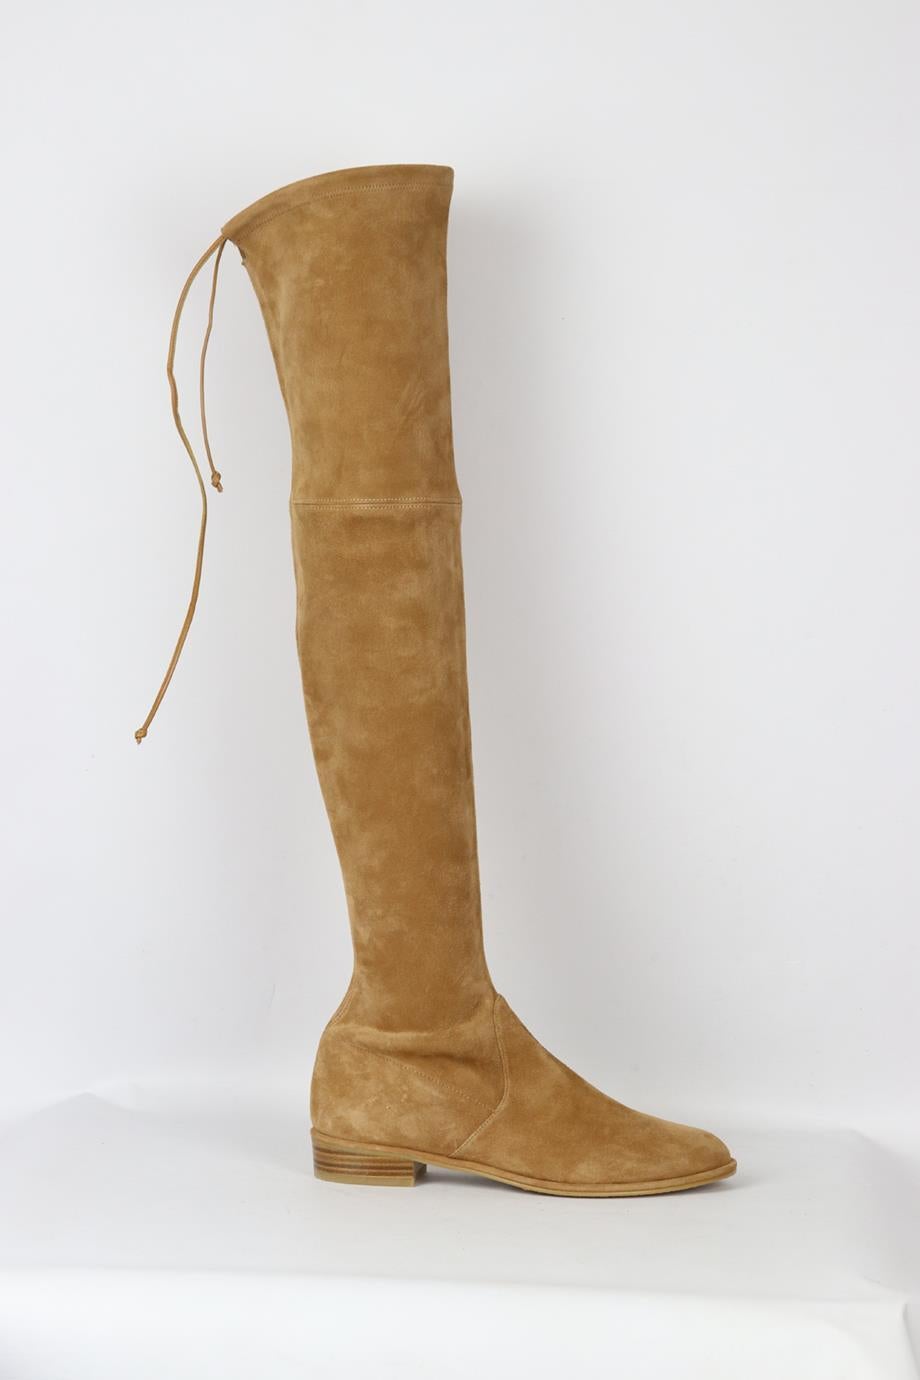 Stuart Weitzman stretch suede over the knee boots. Camel. Pull on. Does not come with dustbag or box. Size: EU 38 (UK 5, US 8). Outersole: 10 in. Shaft: 22.8 in. Heel Height: 1 in. Thigh: 14.8 in. New without box